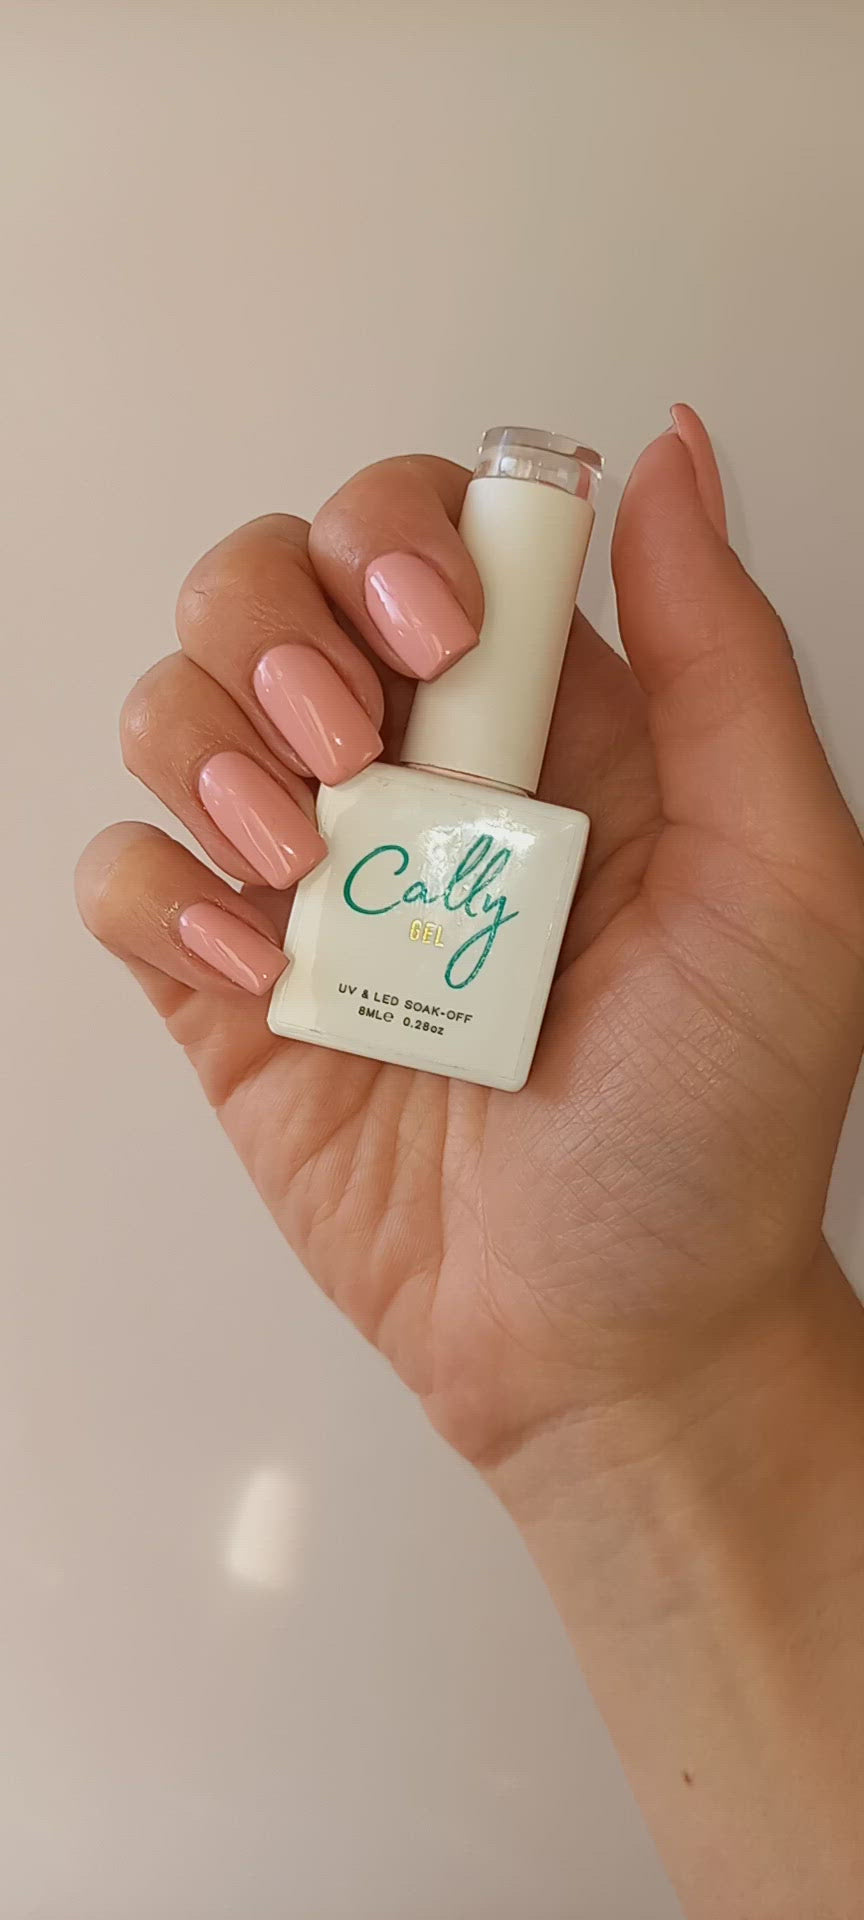 Showing Manicured with Blush Dream Cally Gel Nail Polish and 8ml Bottle in Hand